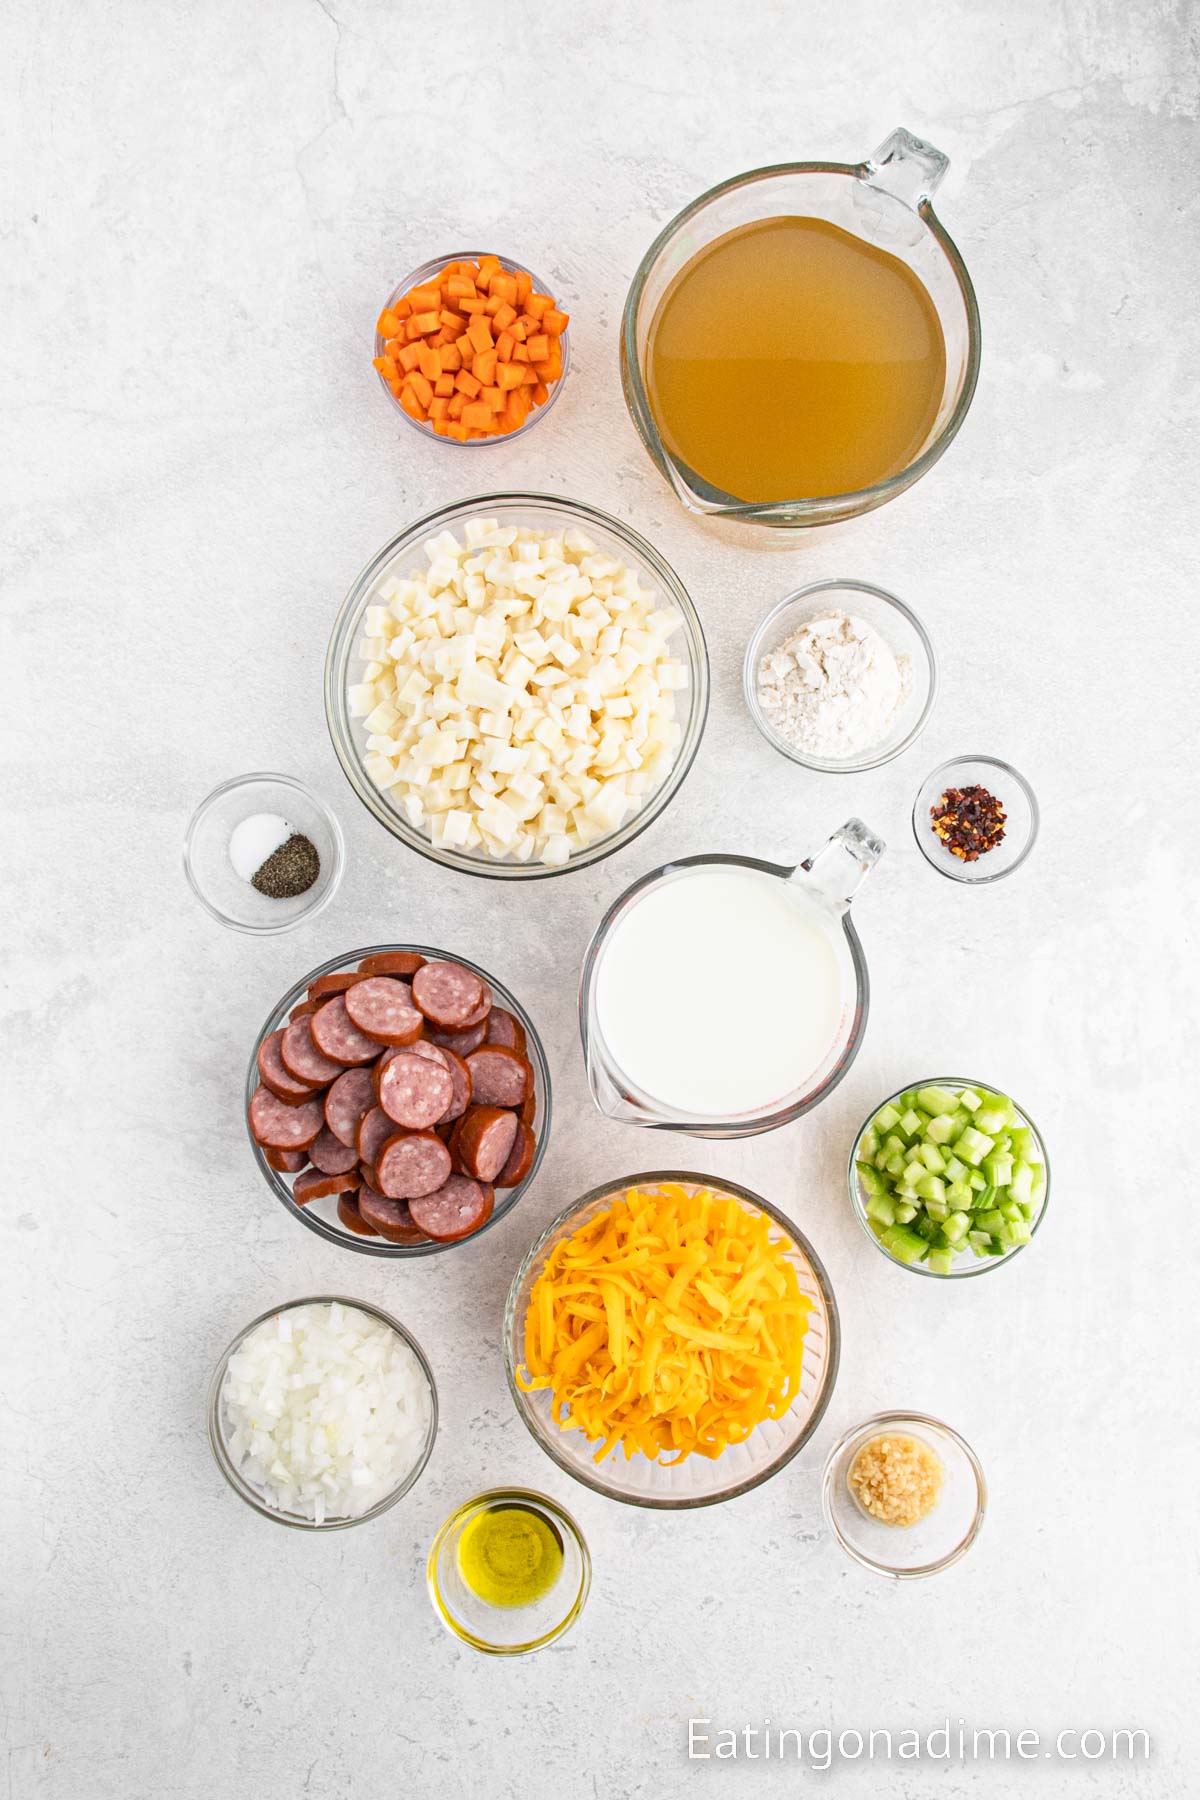 Ingredients needed to make potato and kielbasa soup - Olive oil, sausage, onion, carrots, celery, garlic, flour, chicken broth, hash browns red chili flakes, milk, salt, pepper, cheese